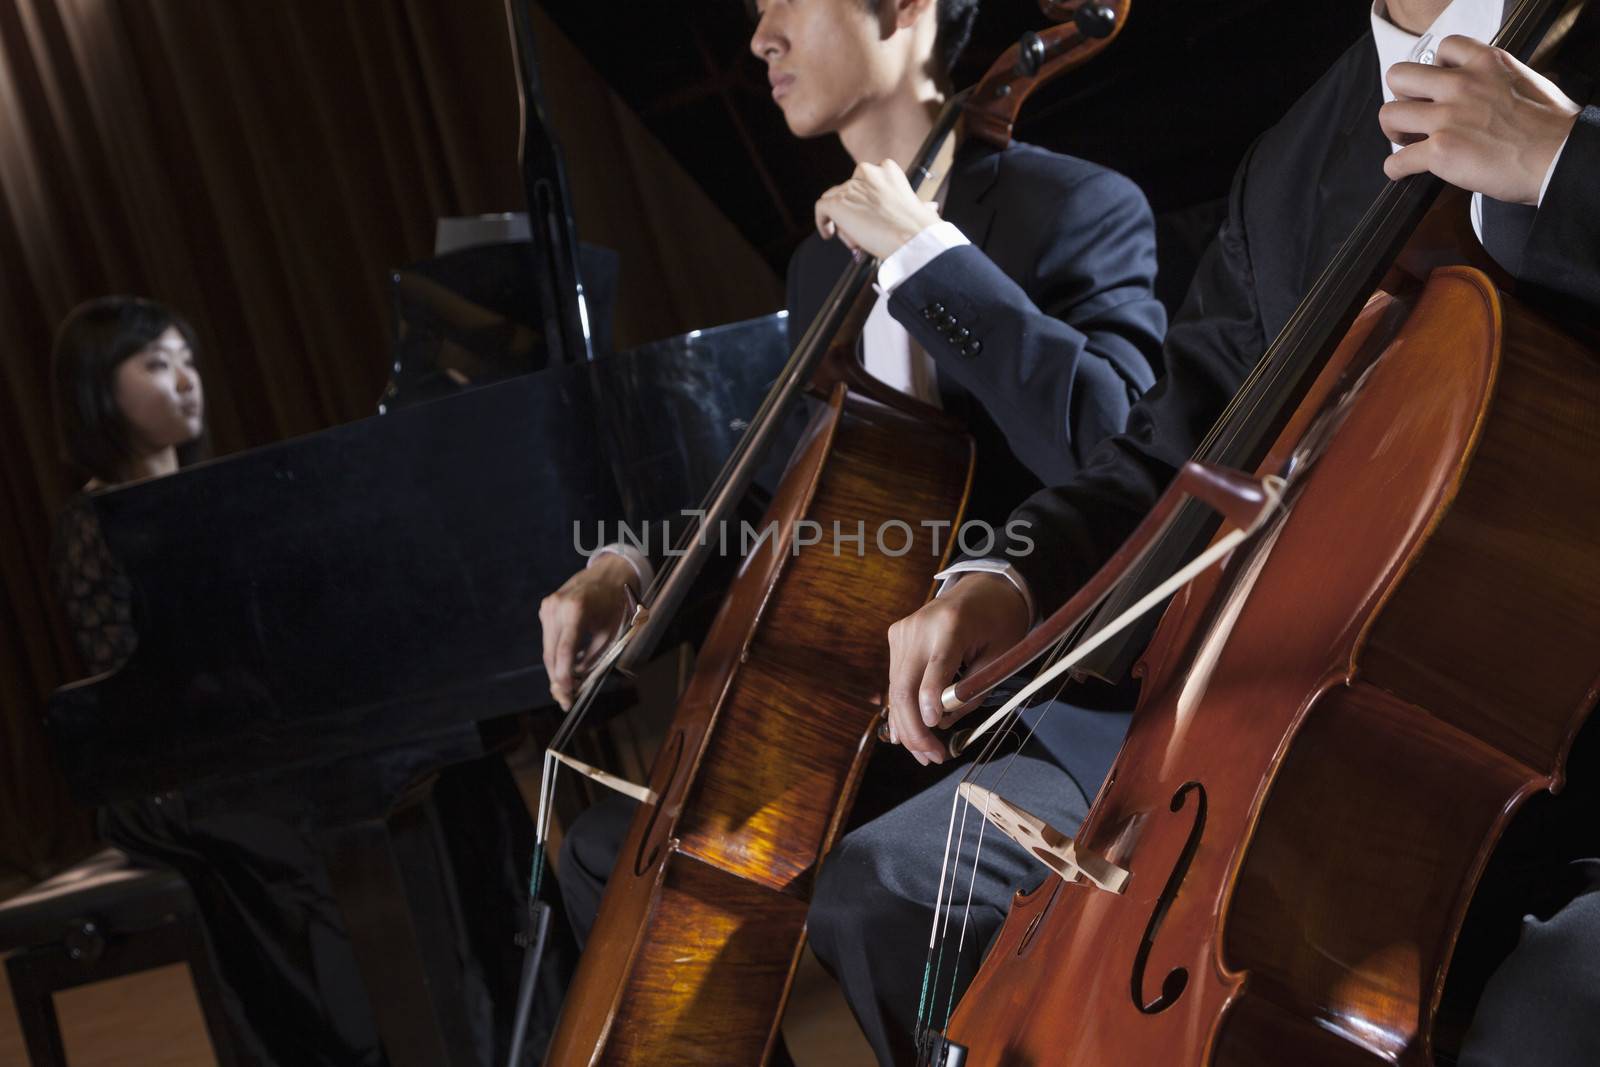 Two cellists playing the cello during a performance